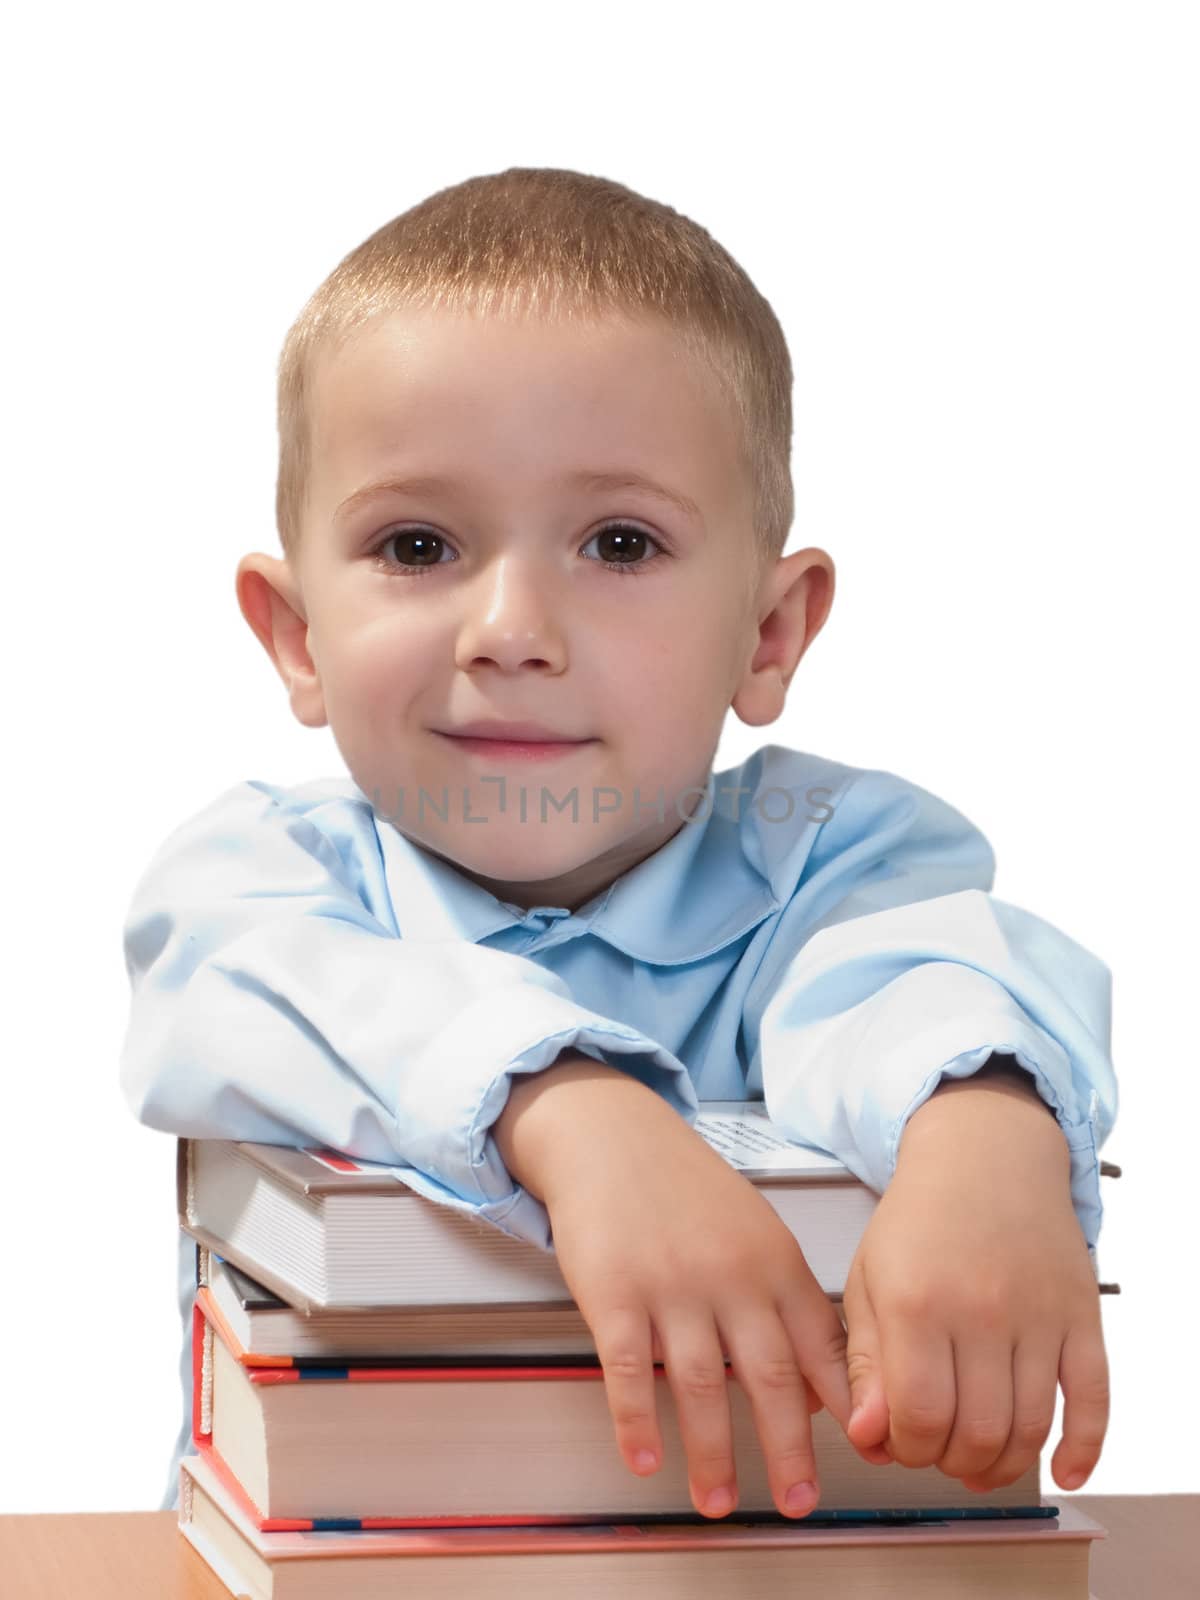 Little child reading education book for school